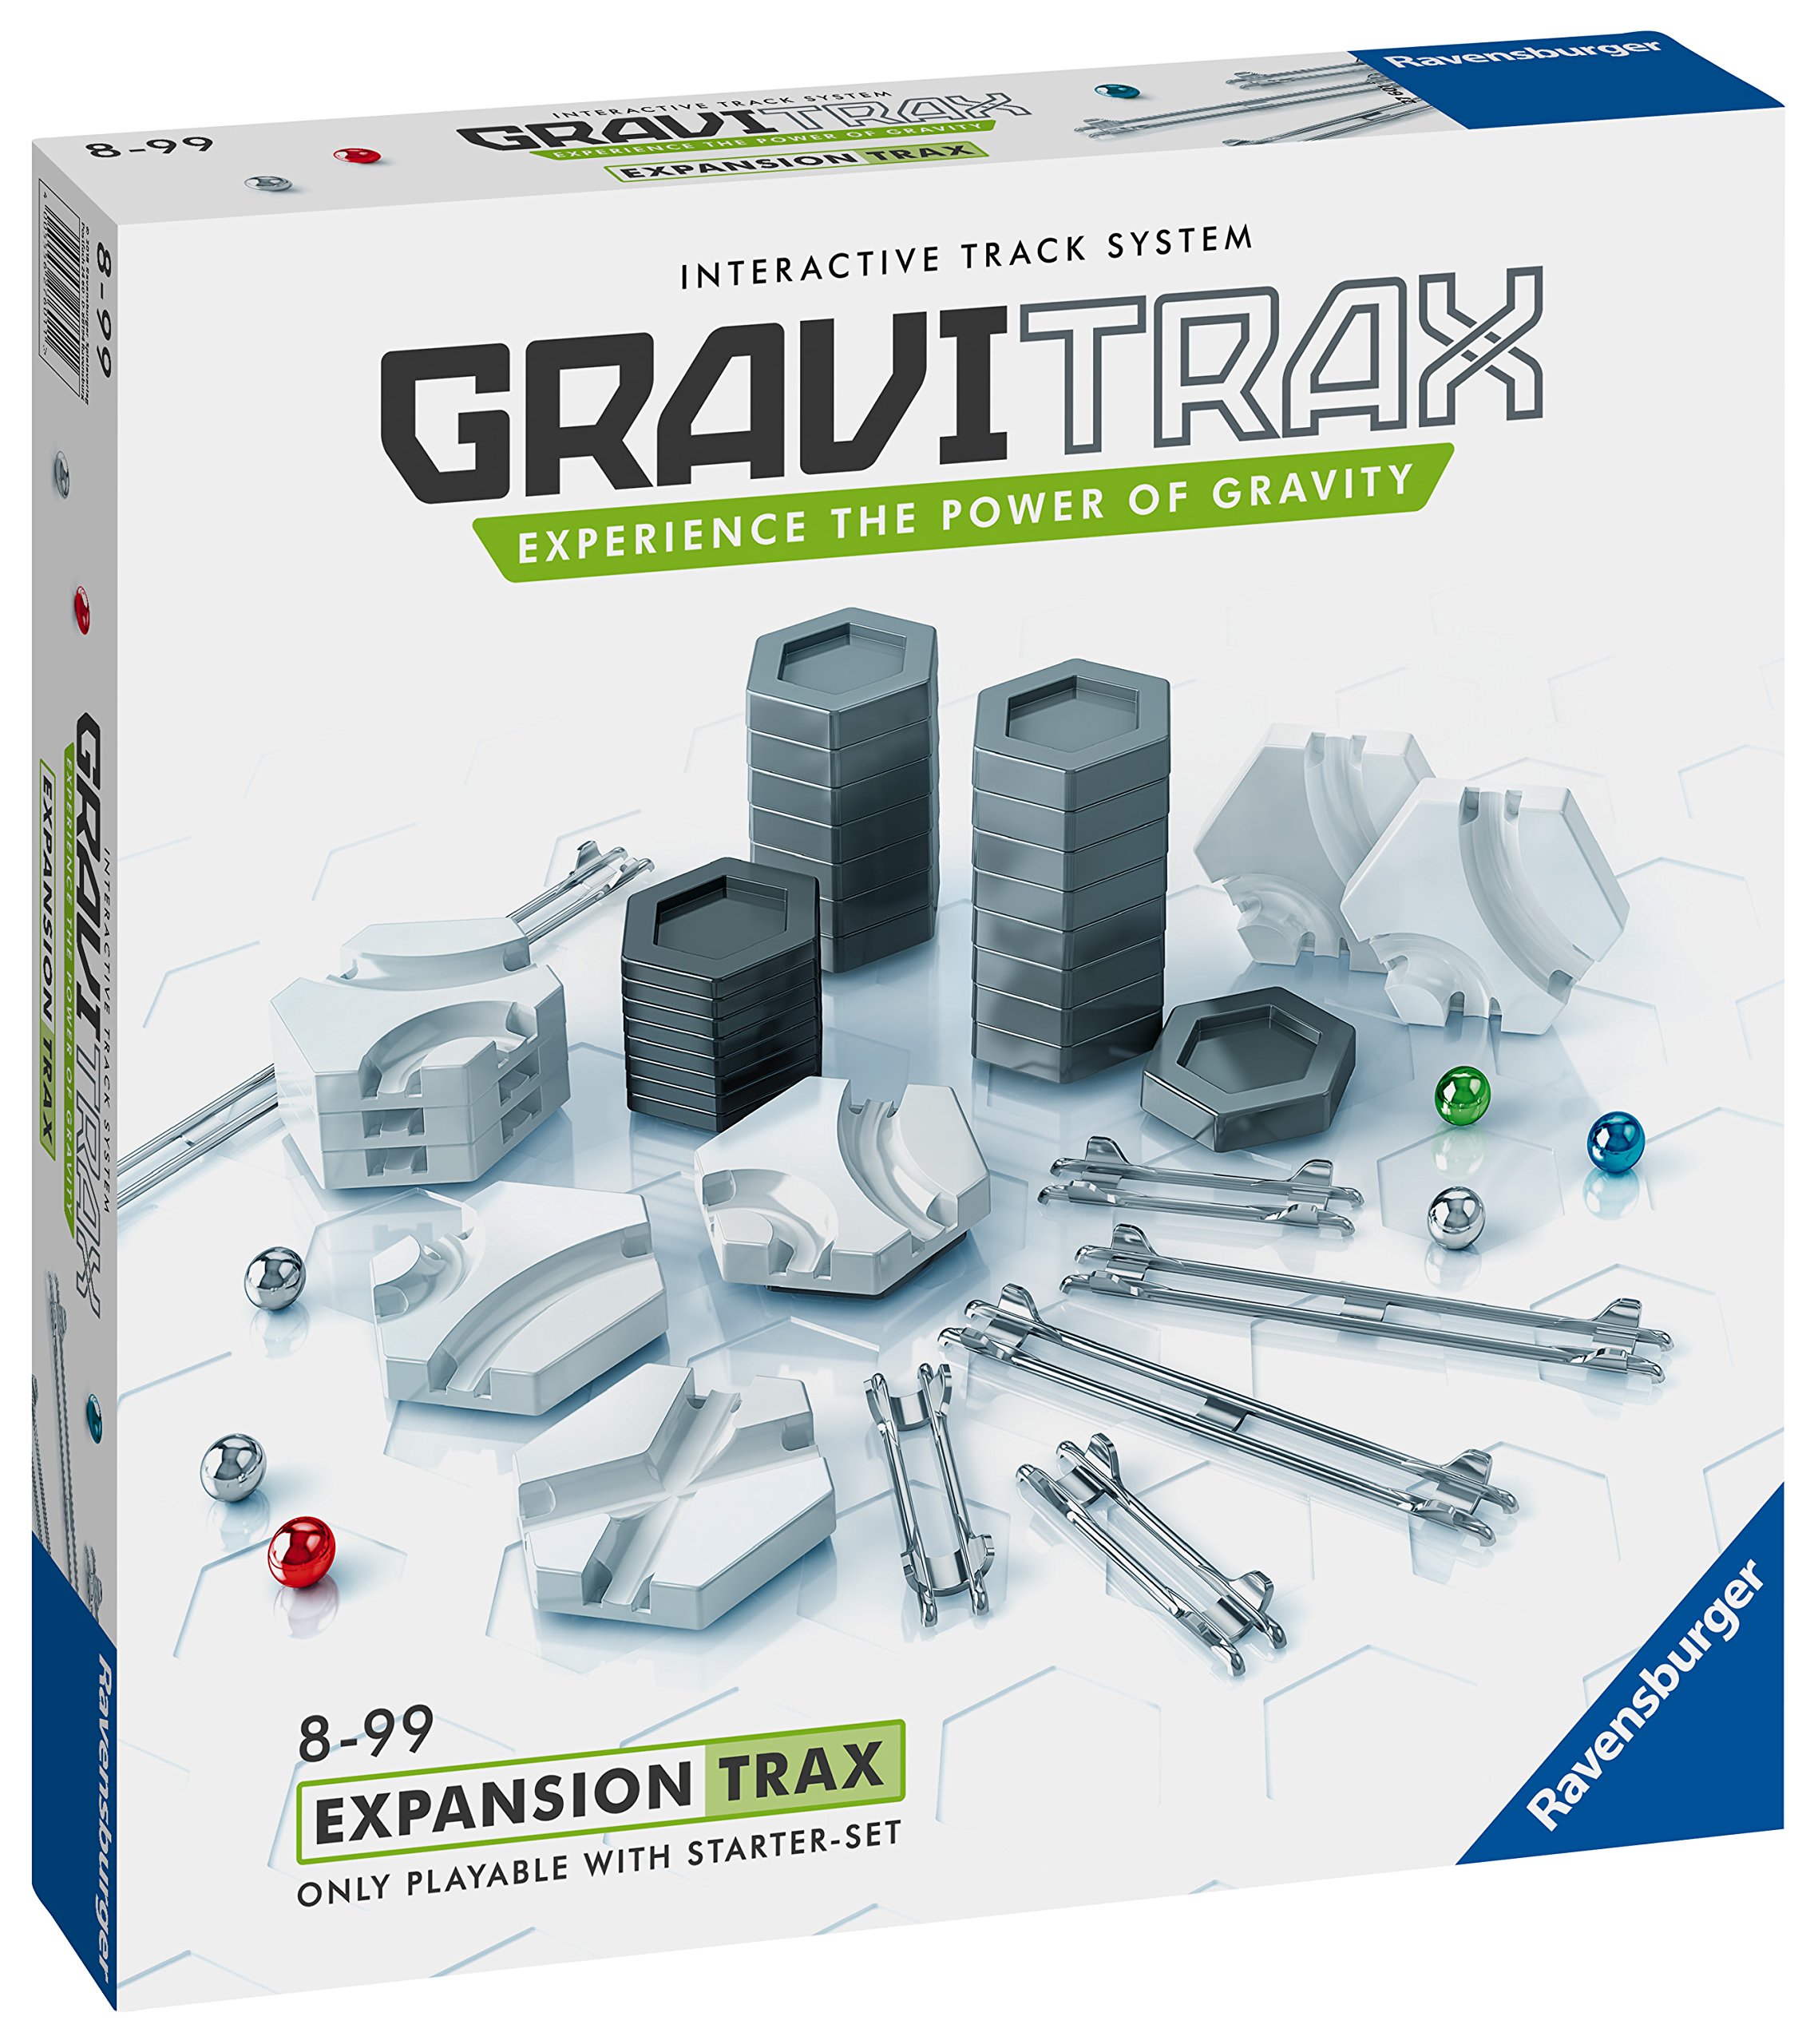 Ravensburger 27601 Gravitrax Trax Expansion Set Marble Run & STEM Toy For Boys & Girls Age 8 & Up - Expansion For 2019 Toy of The Year Finalist Gravitrax, Multi